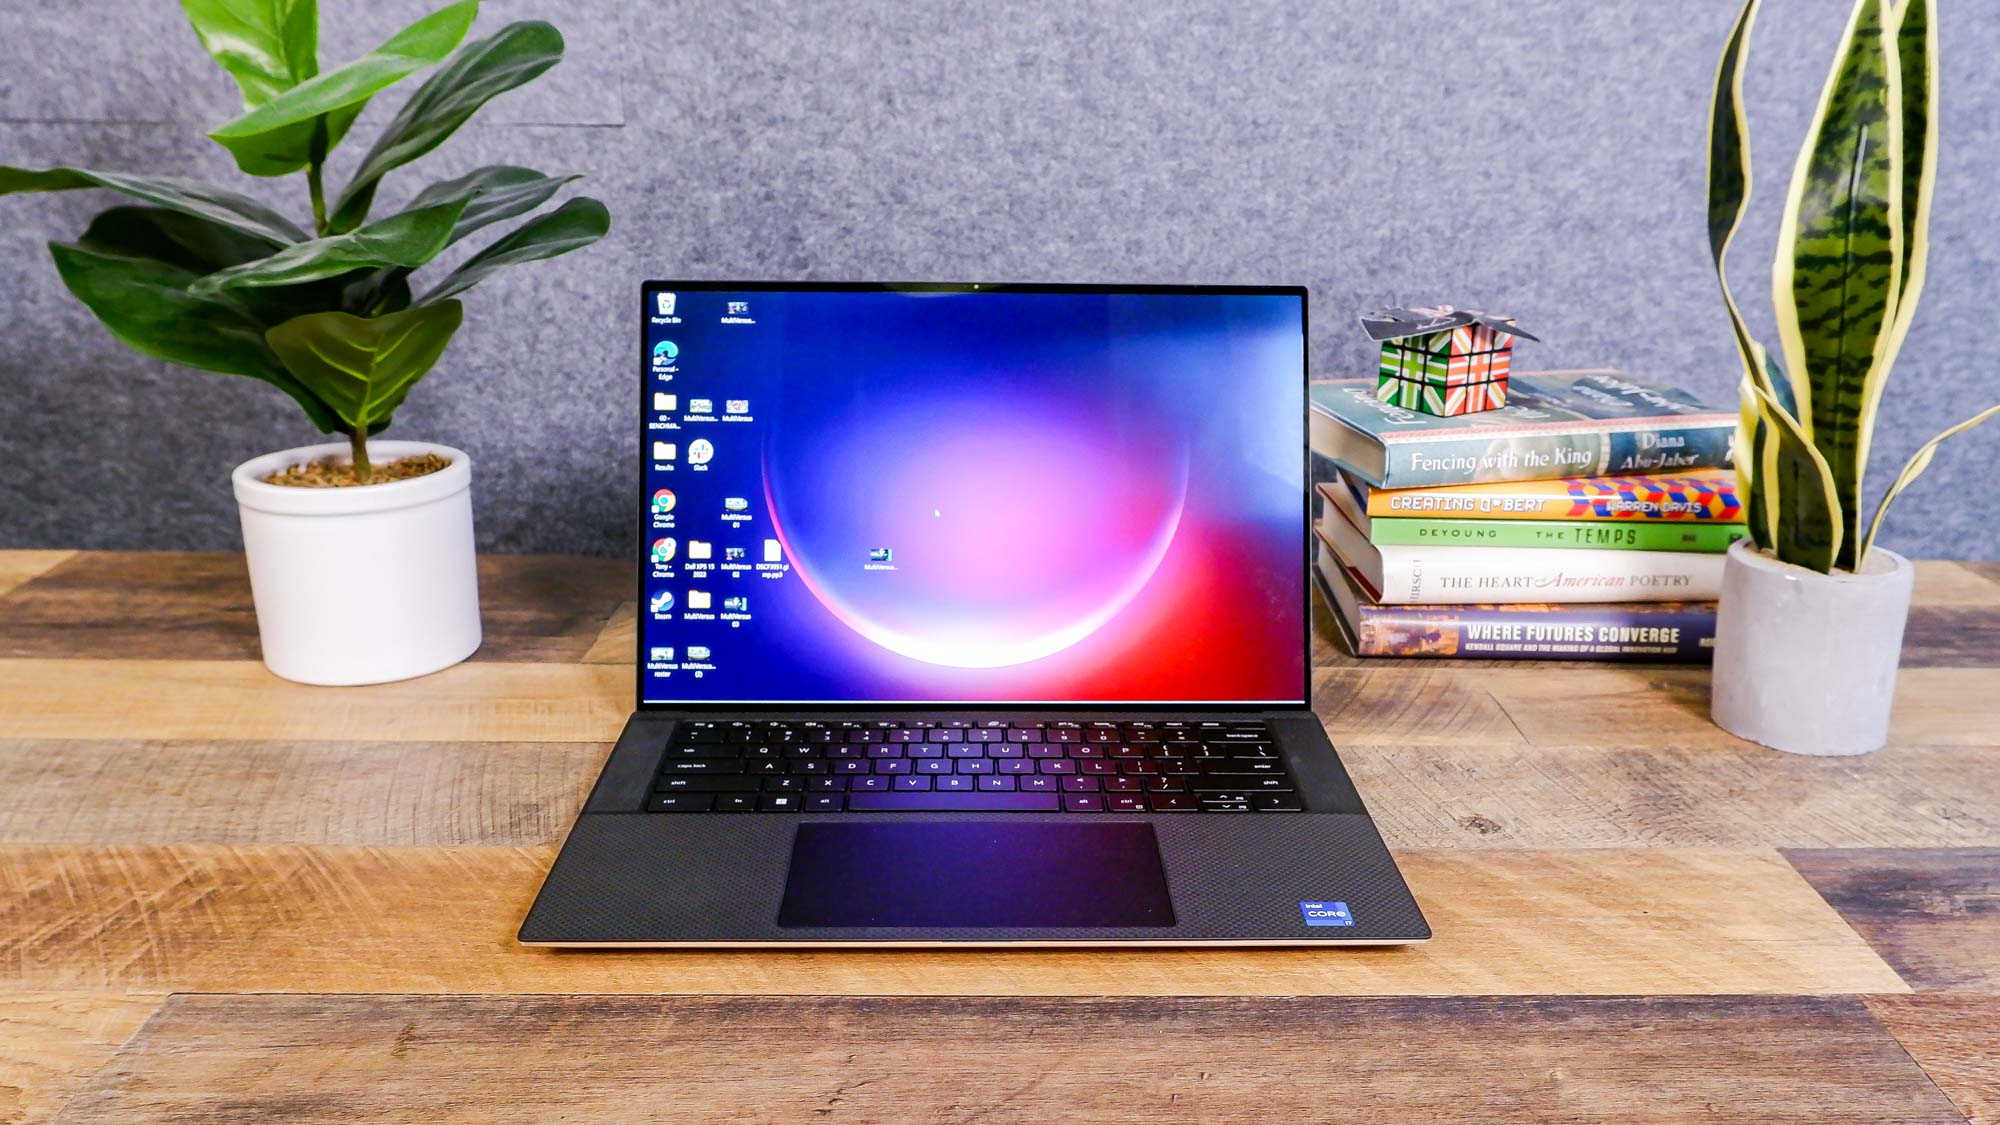 Dell Xps 13 Vs Dell Xps 15: Which Laptop Should You Buy? | Tom'S Guide